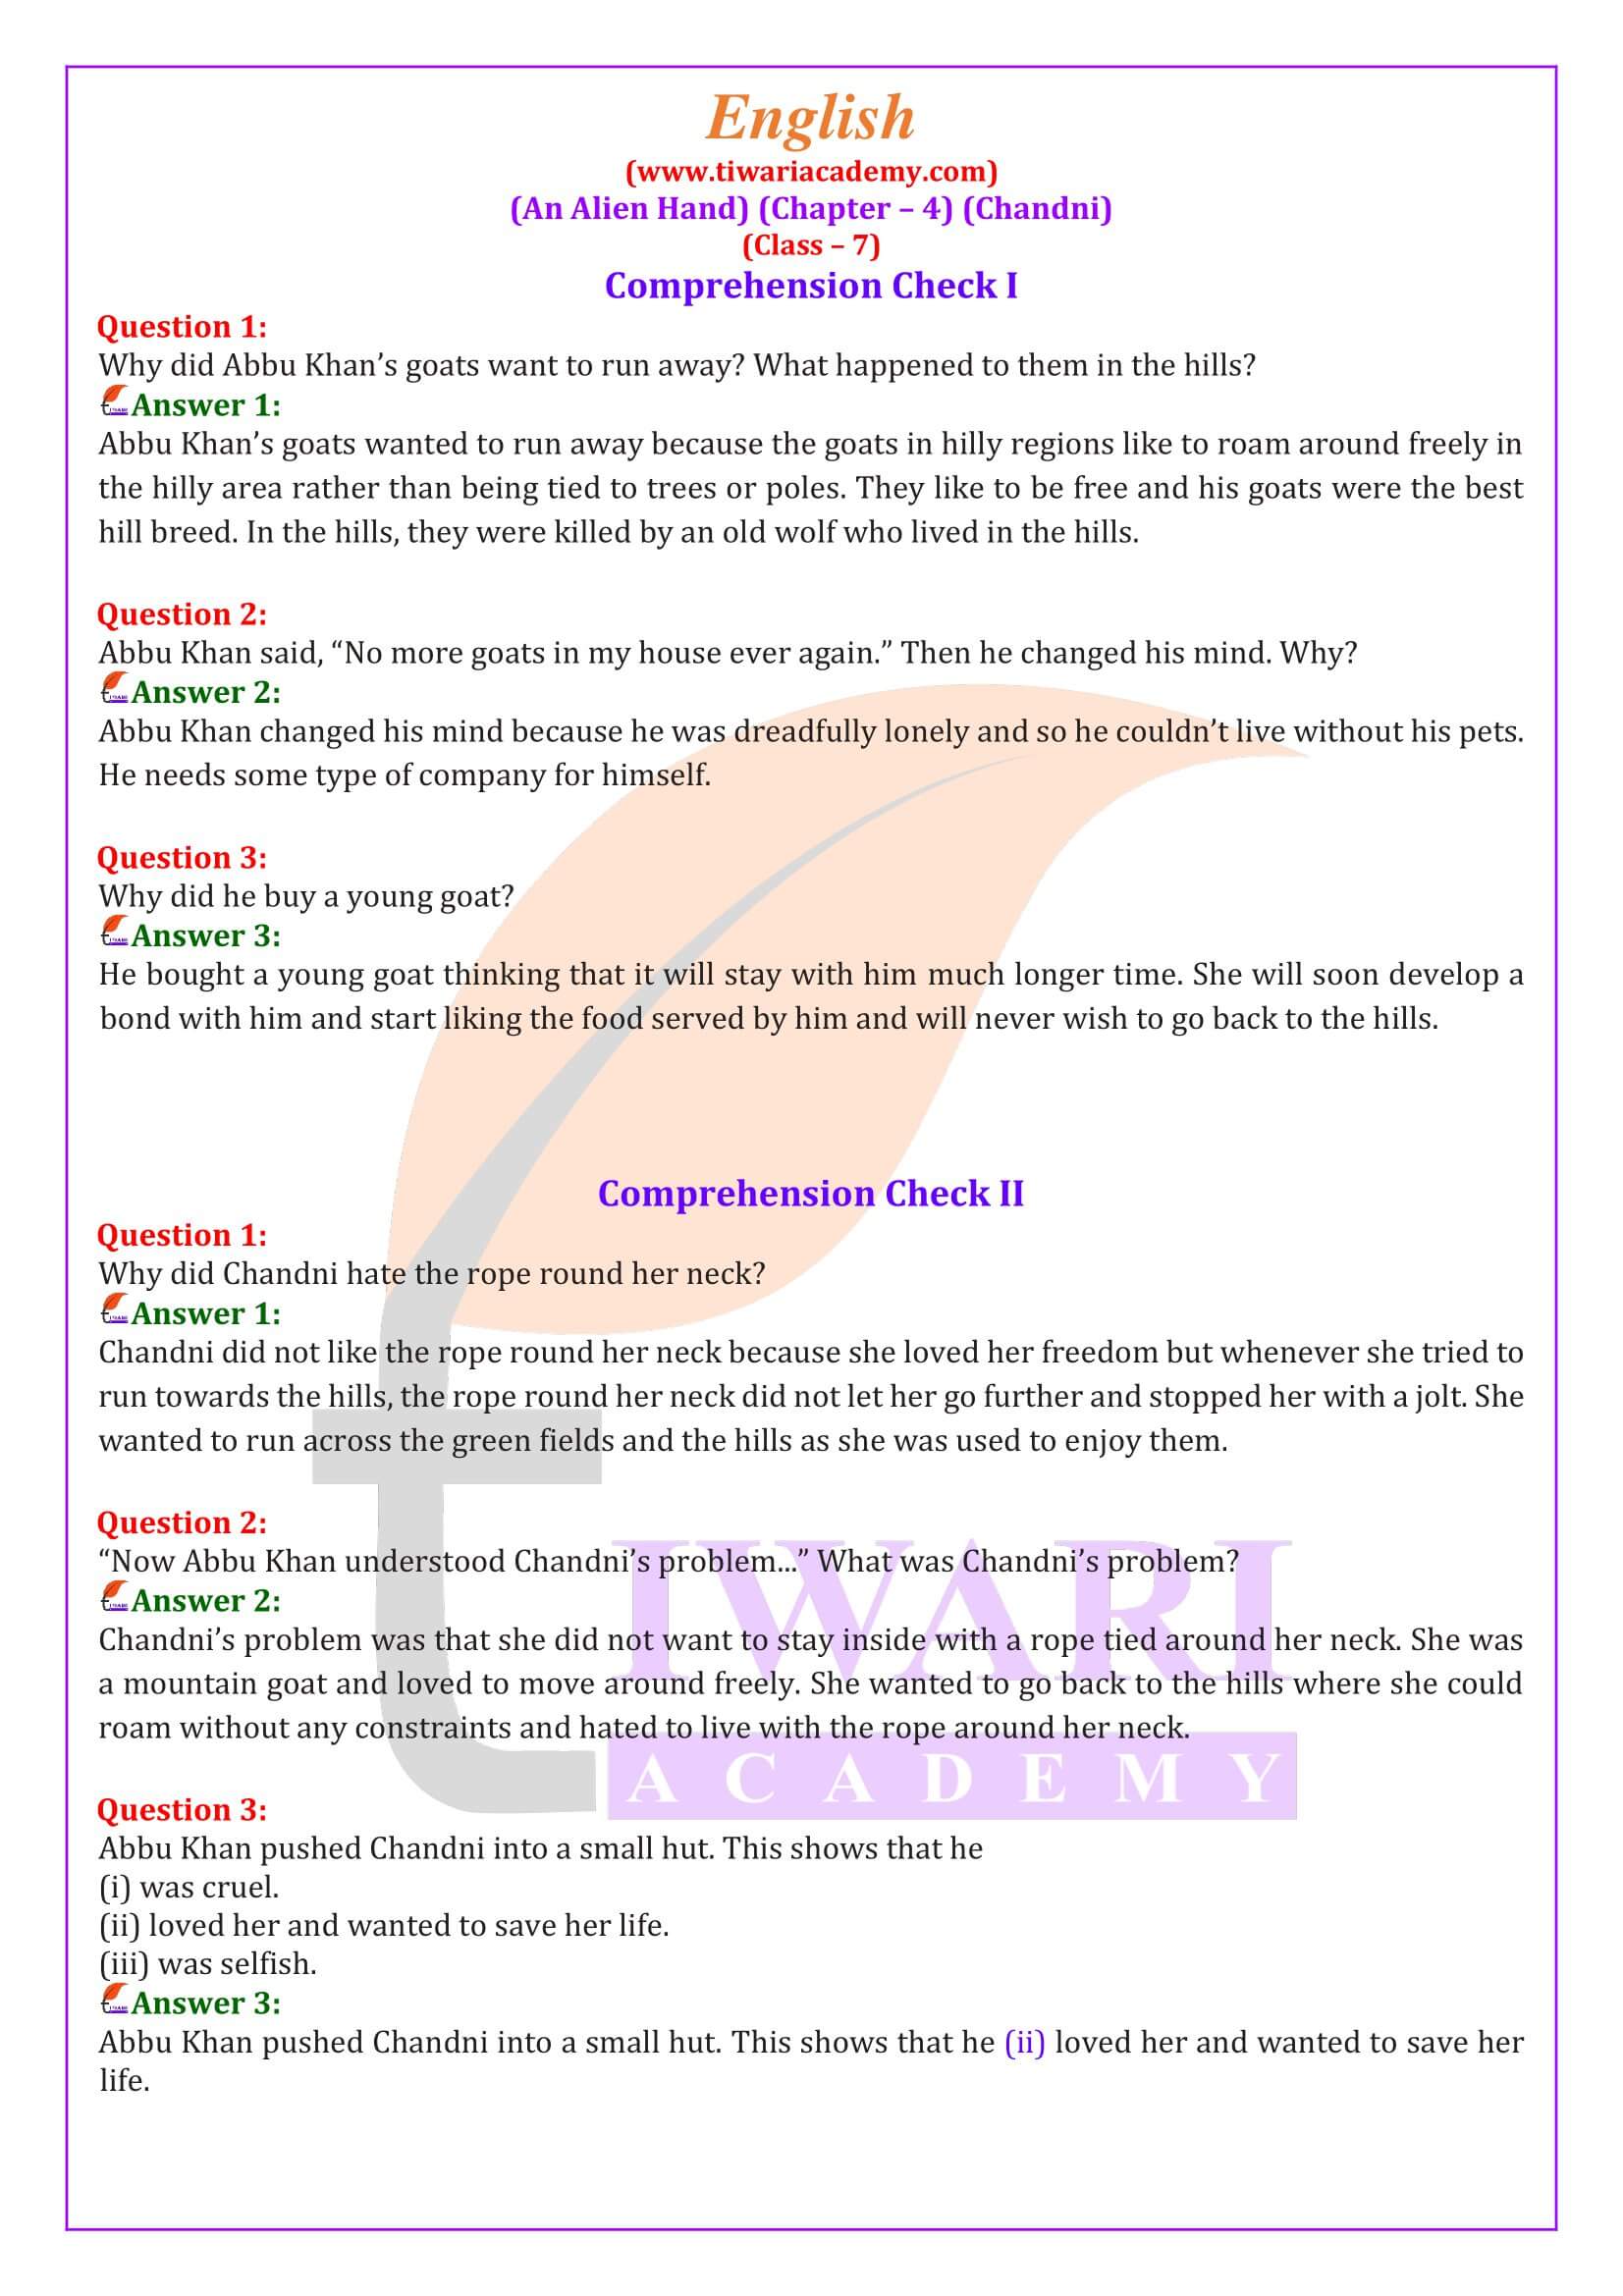 Class 7 English Supplementary Chapter 4. Chandni